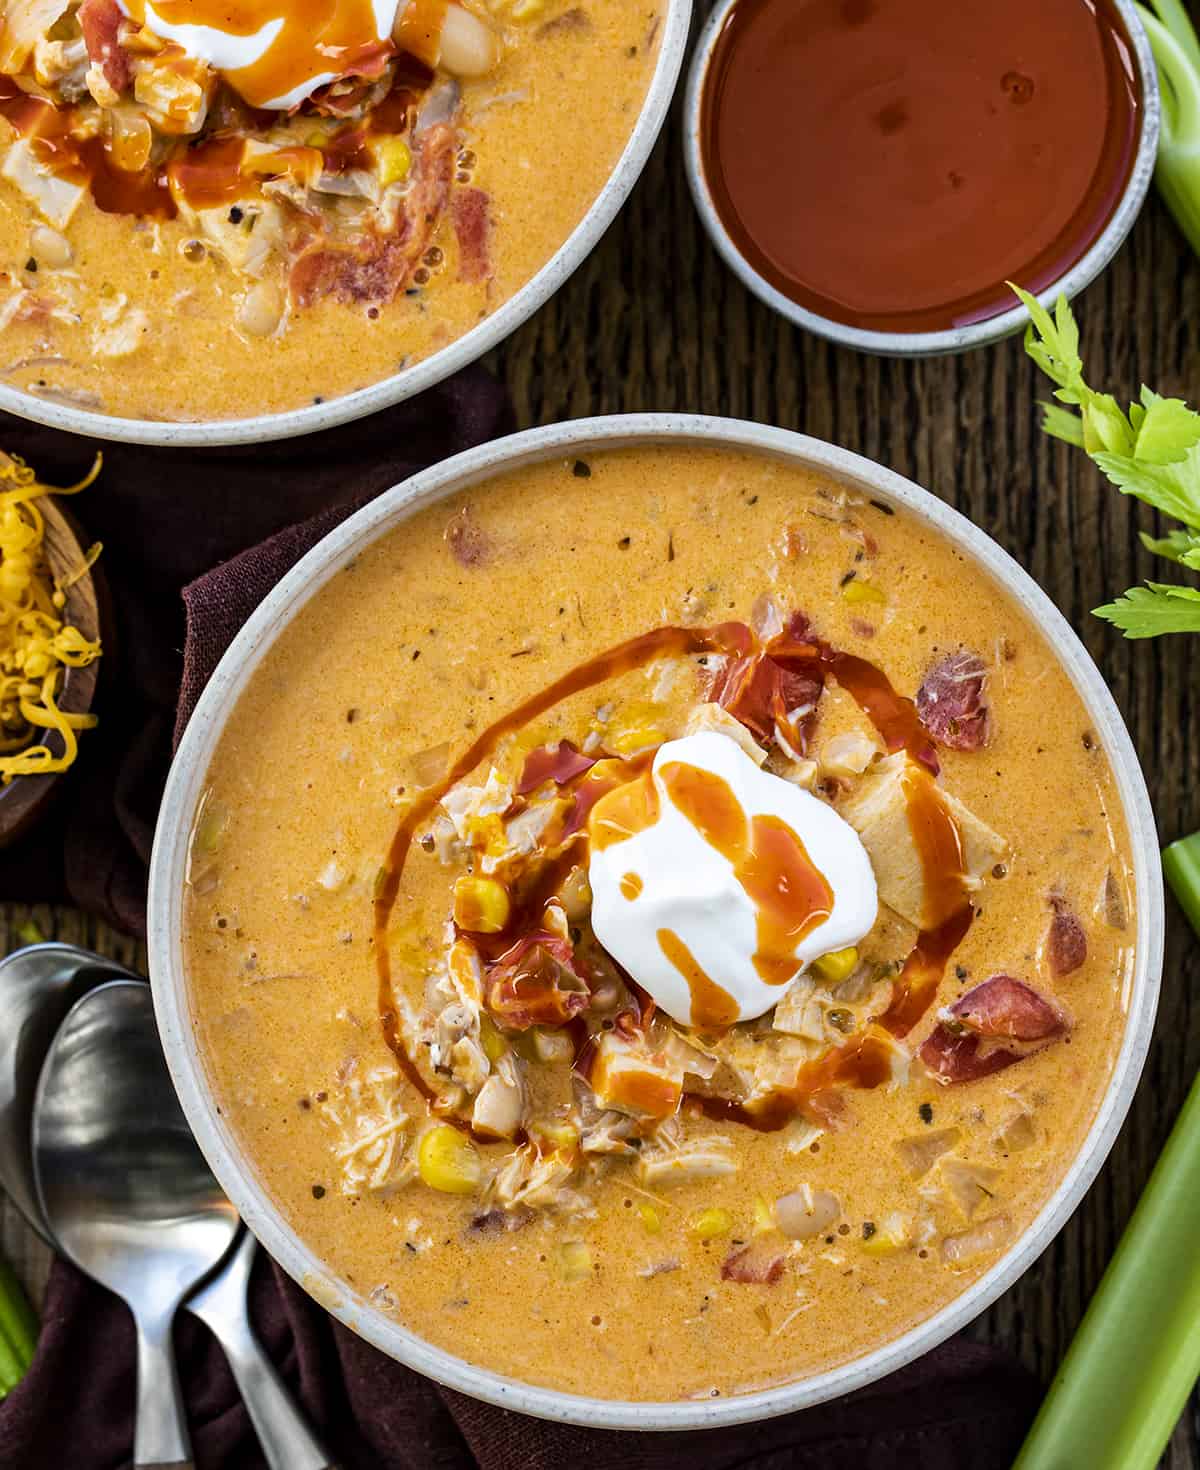 Bowls of Buffalo Chicken Soup with Celery, Buffalo Sauce, and Extra Cheese. Soup, Comfort Food, Game Day Food, Fall Soups, Soup Recipes, Buffalo Chicken Recipes, SuperBowl Food, Creamy Soups, Dinner, Supper, recipes, i am homesteader, iamhomesteader